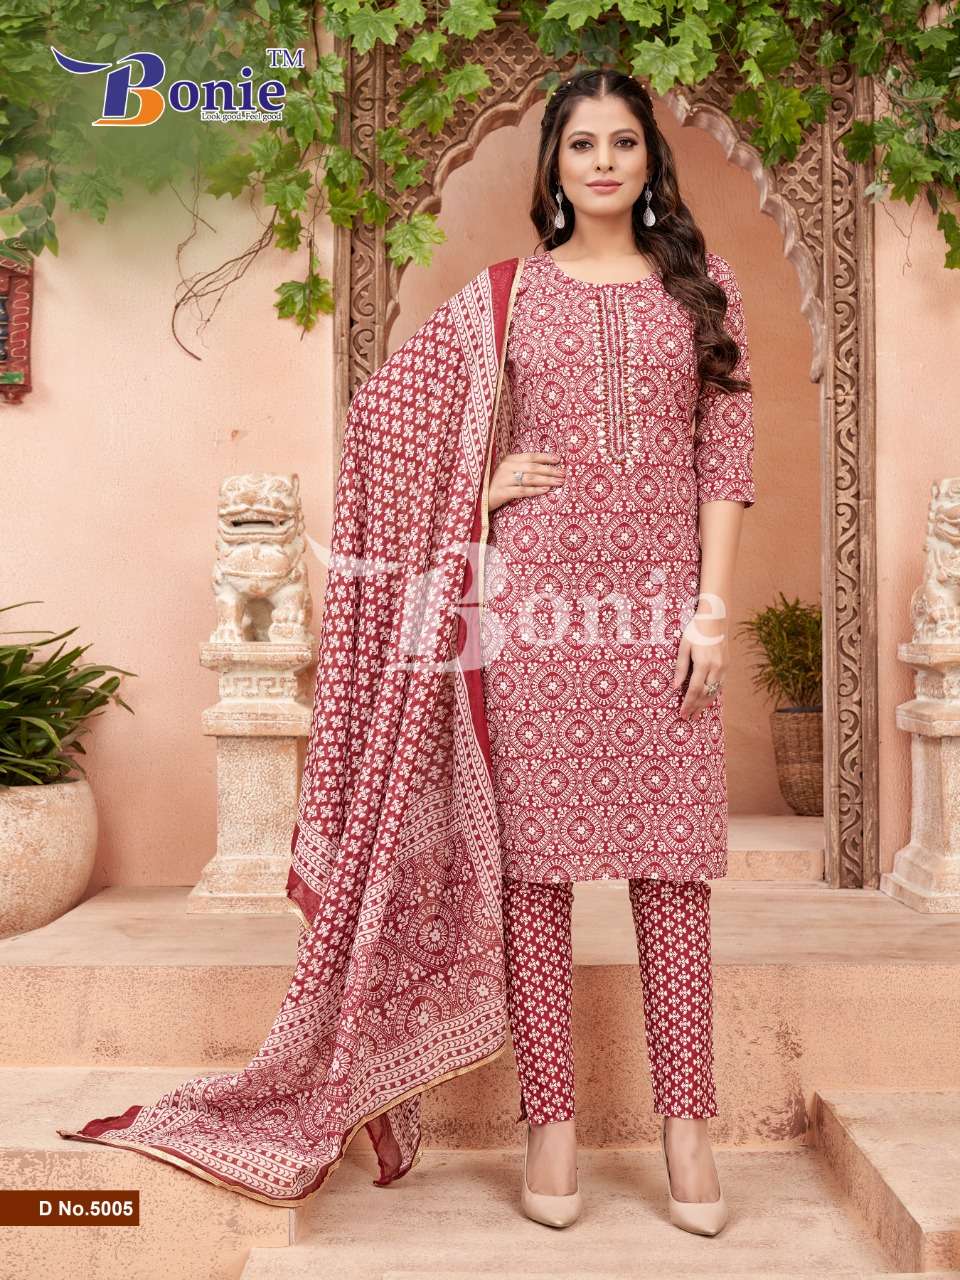 Noor Vol-5 By Bonie 5001 To 5005 Series Beautiful Festive Suits Colorful Stylish Fancy Casual Wear & Ethnic Wear Cotton Print Dresses At Wholesale Price